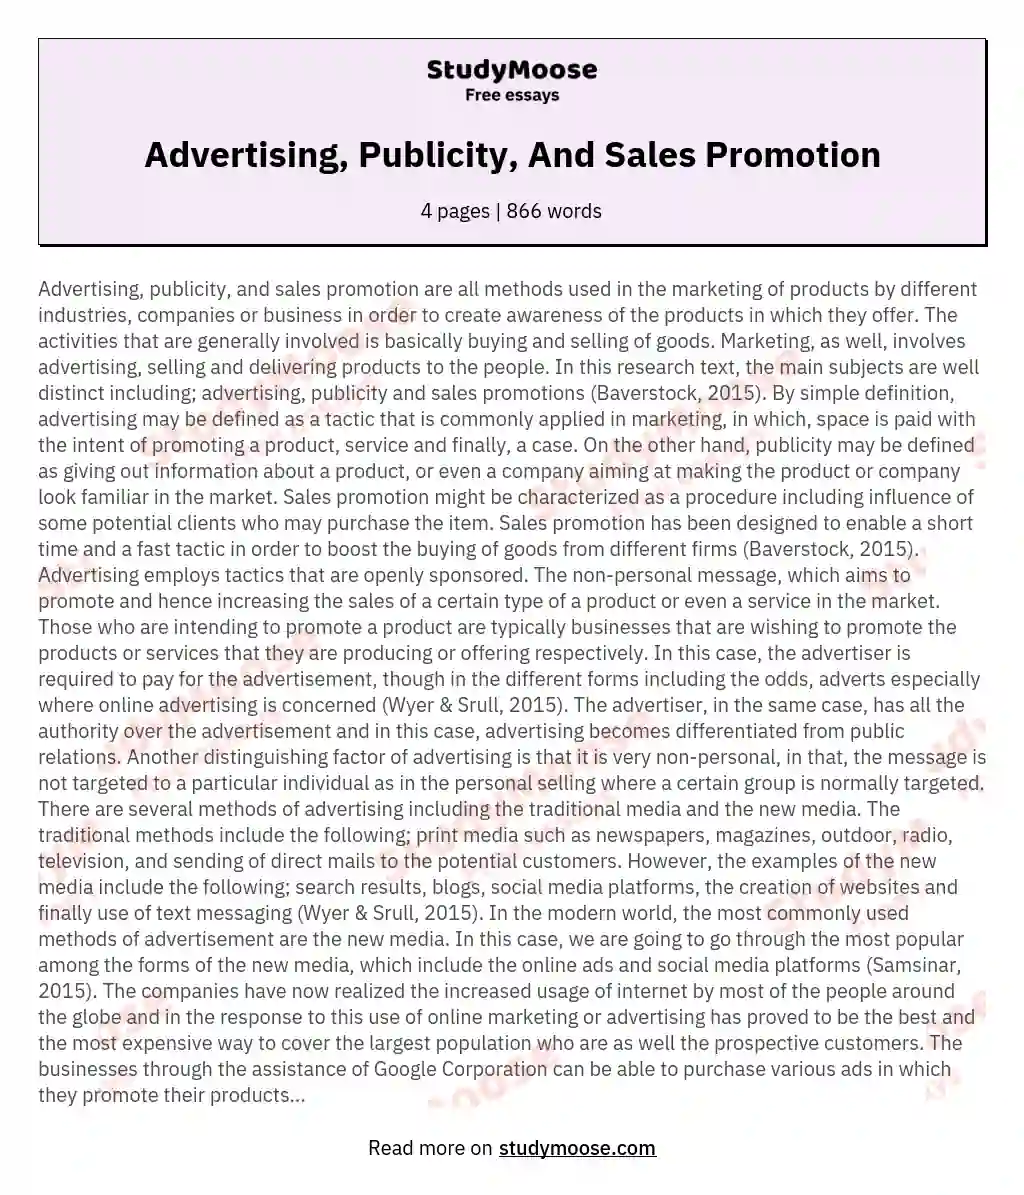 Advertising, Publicity, And Sales Promotion essay